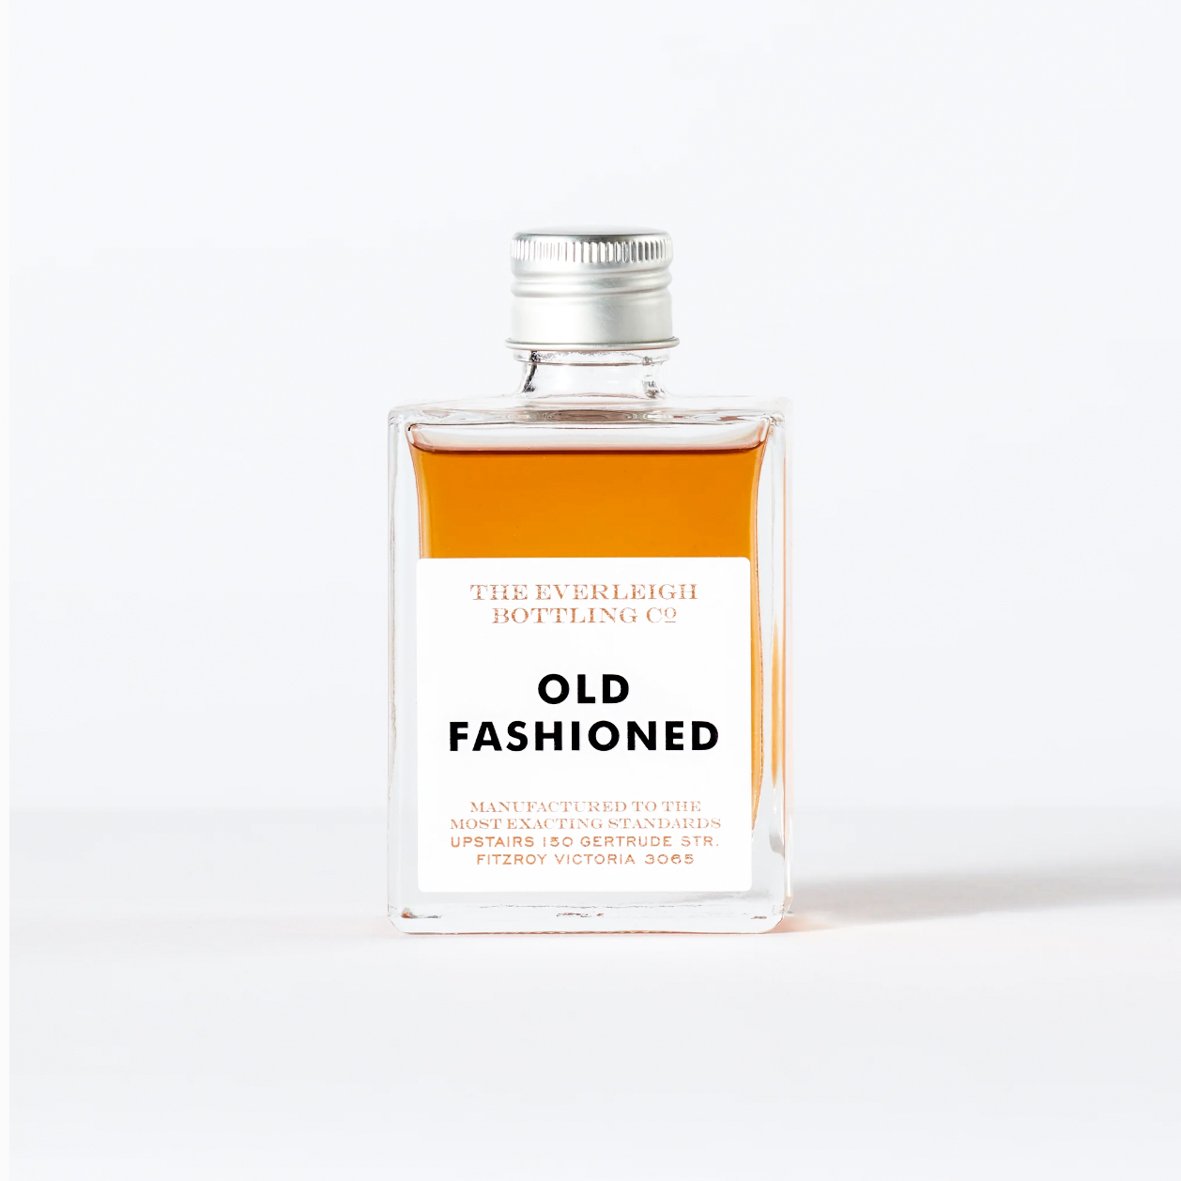 EVELEIGH OLD FASHIONED BOTTLING CO-3.jpg